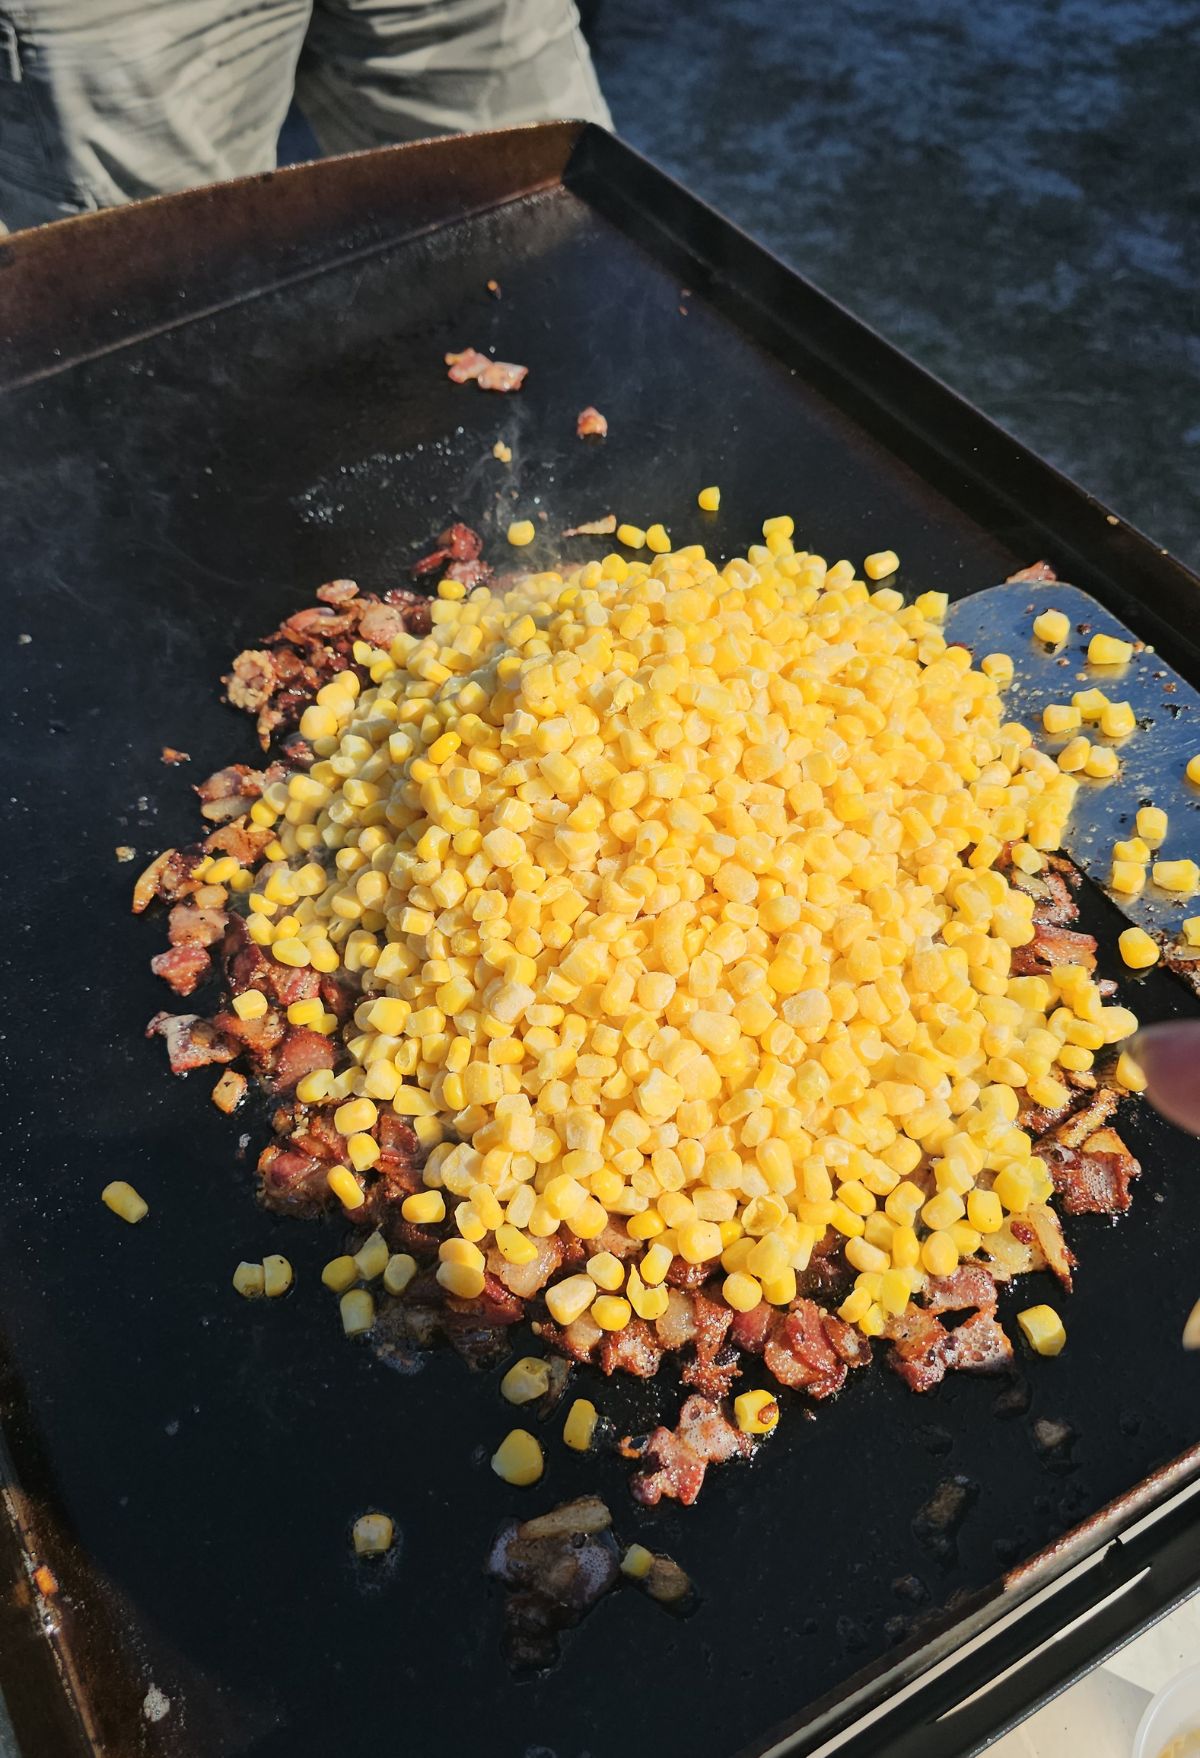 Corn kernels cooking with bacon pieces on a flat grill.